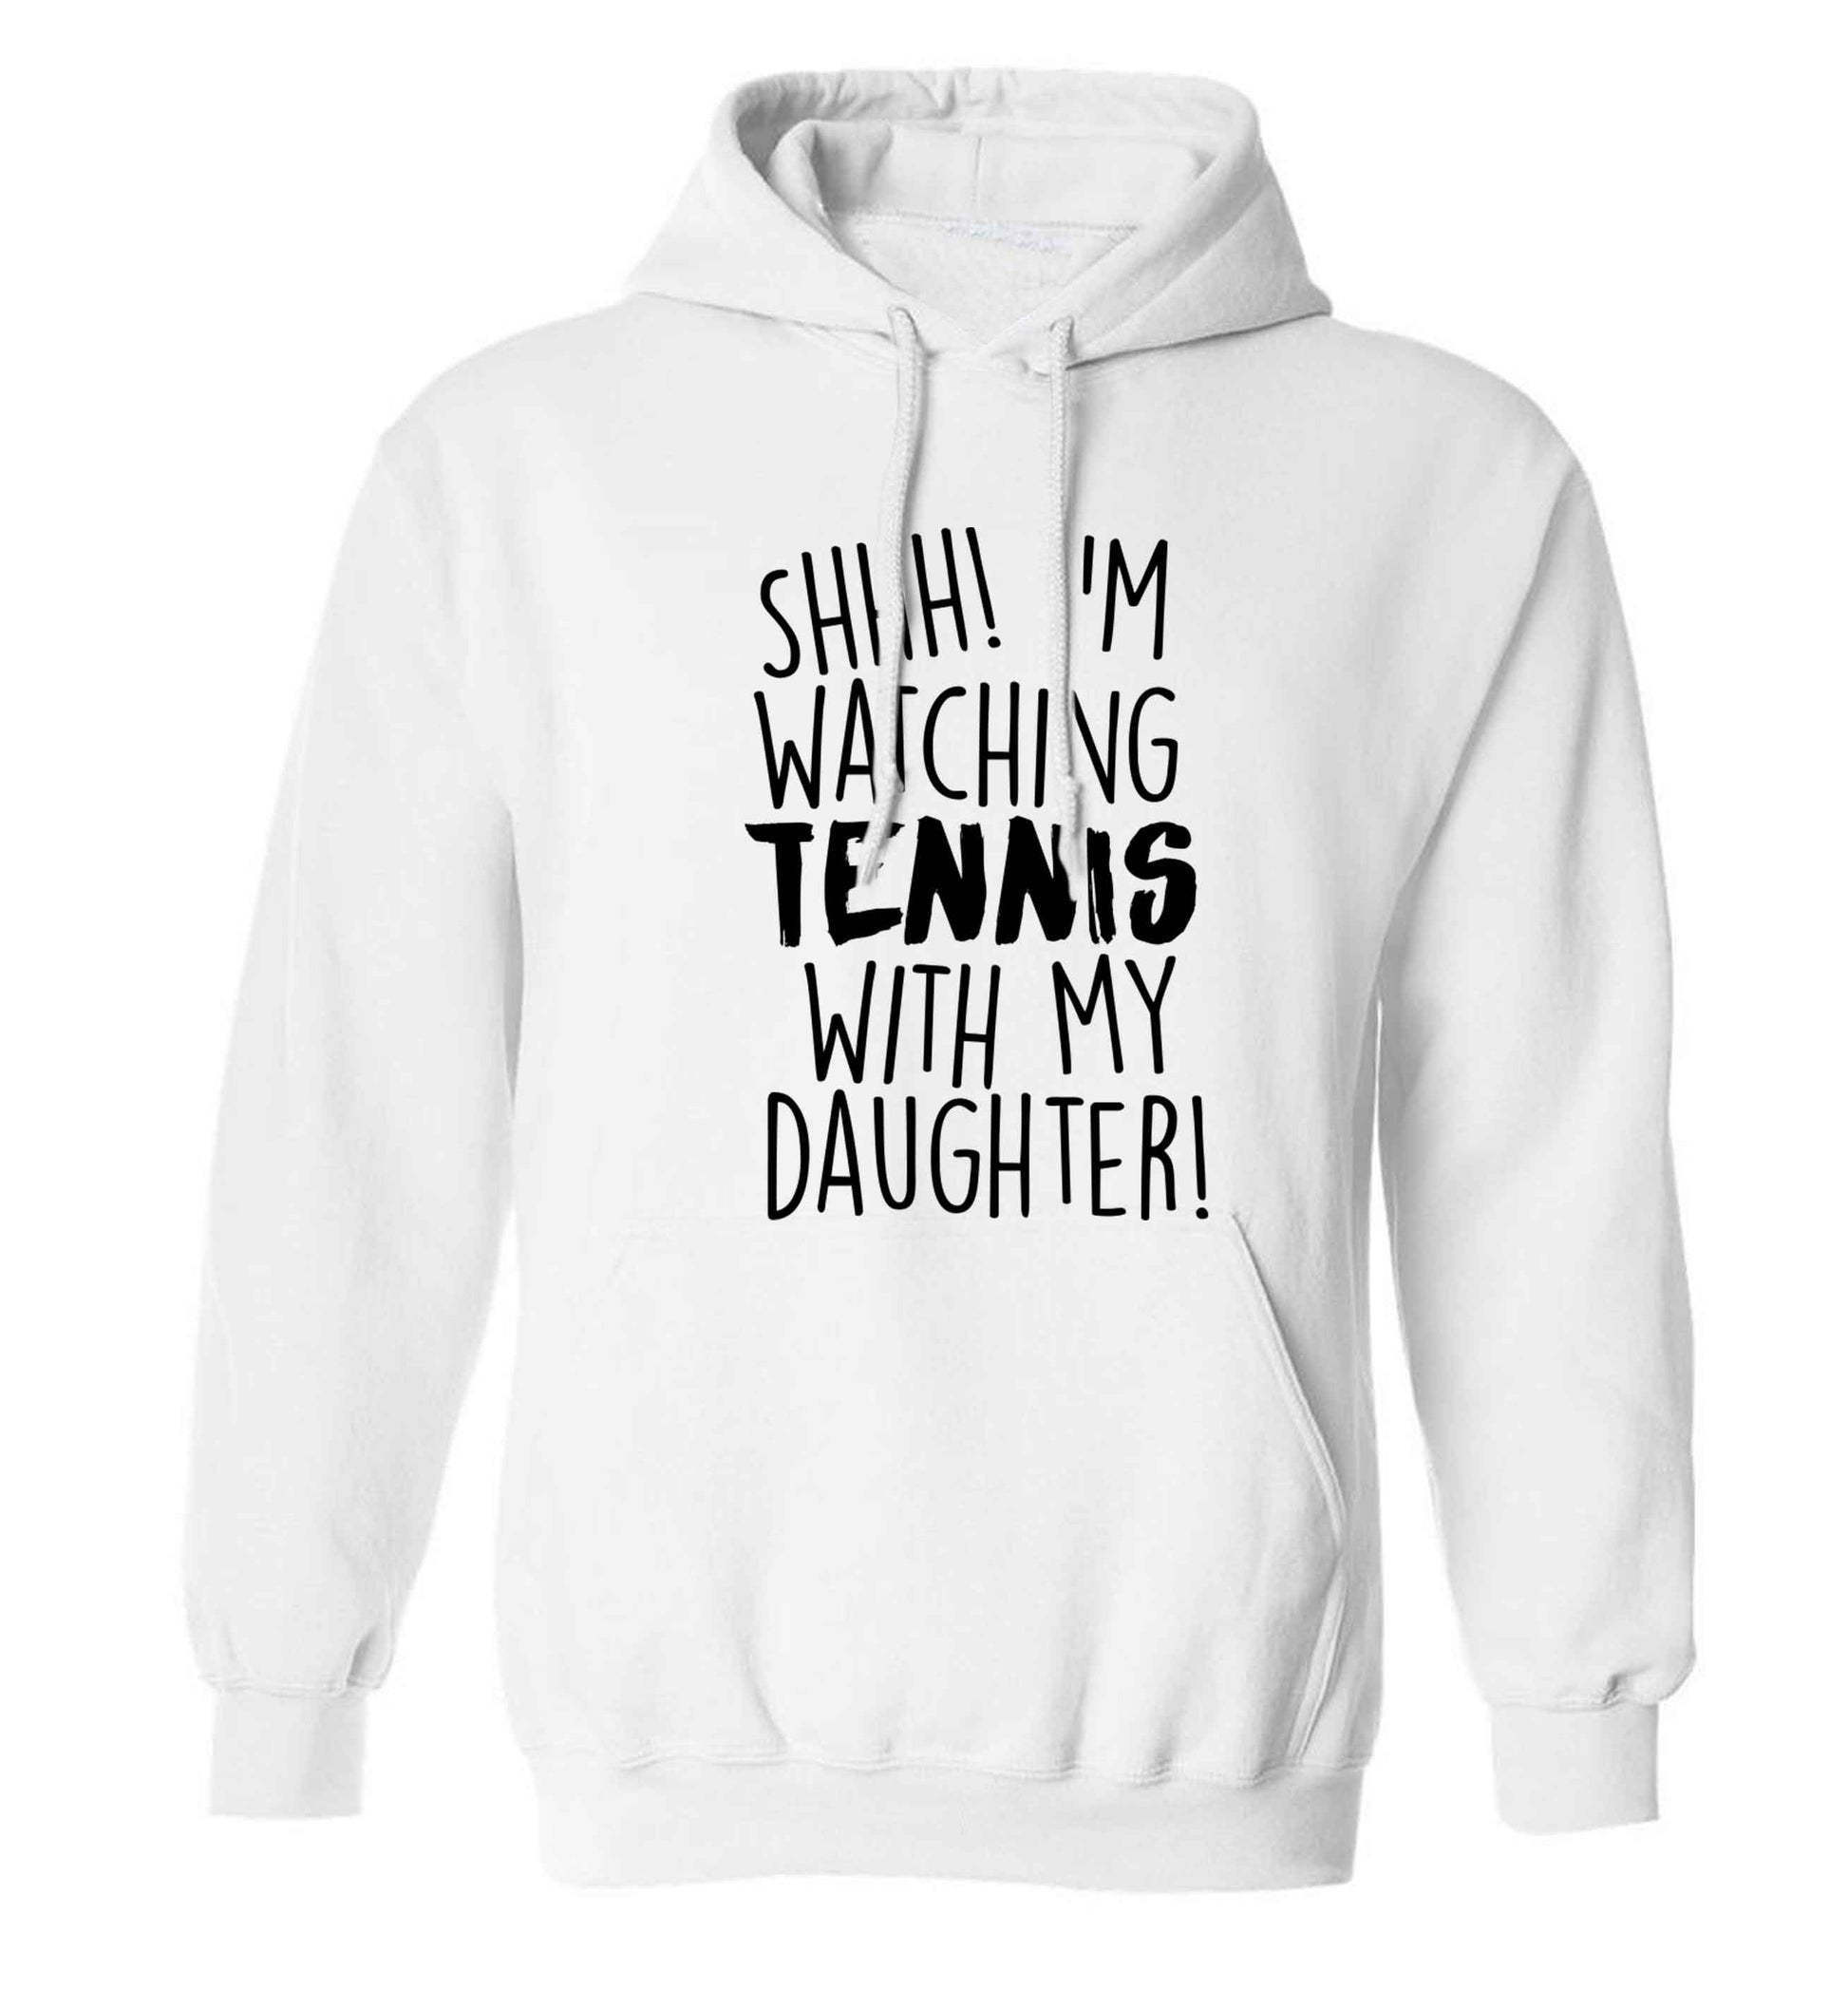 Shh! I'm watching tennis with my daughter! adults unisex white hoodie 2XL